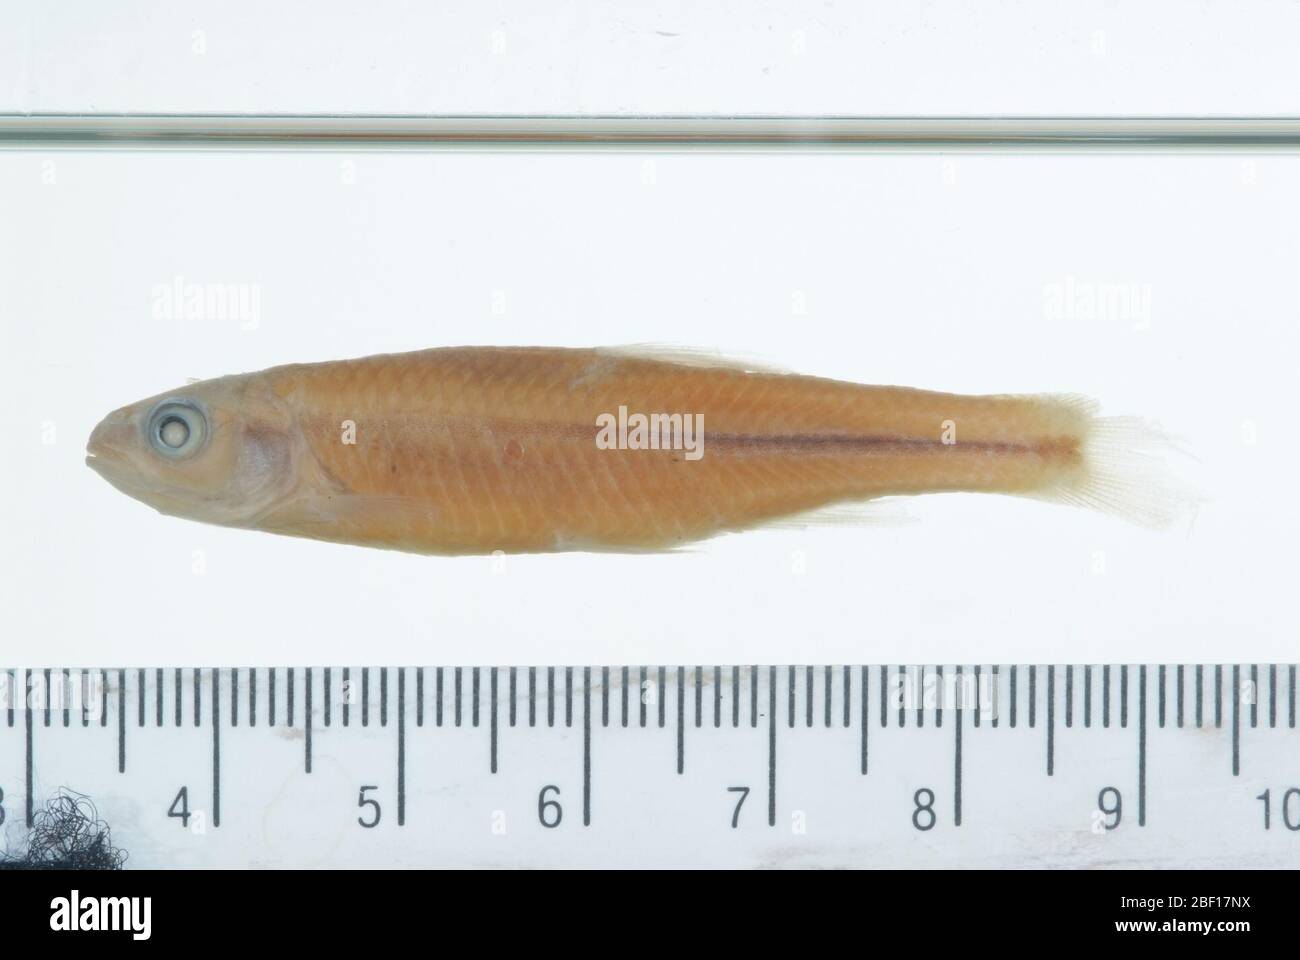 Photogenis callistius. 1 out as 163965; 1 out as 163966 lectotype designation by r. h. gibbs, jr. in gilbert, c. r., 1978. type catalogue of the north america cyprinid fish genus notropis. bulletin of the florida state museum, biological sciences, vol. 23, no. 1, p. 34.21 Feb 20181 Stock Photo